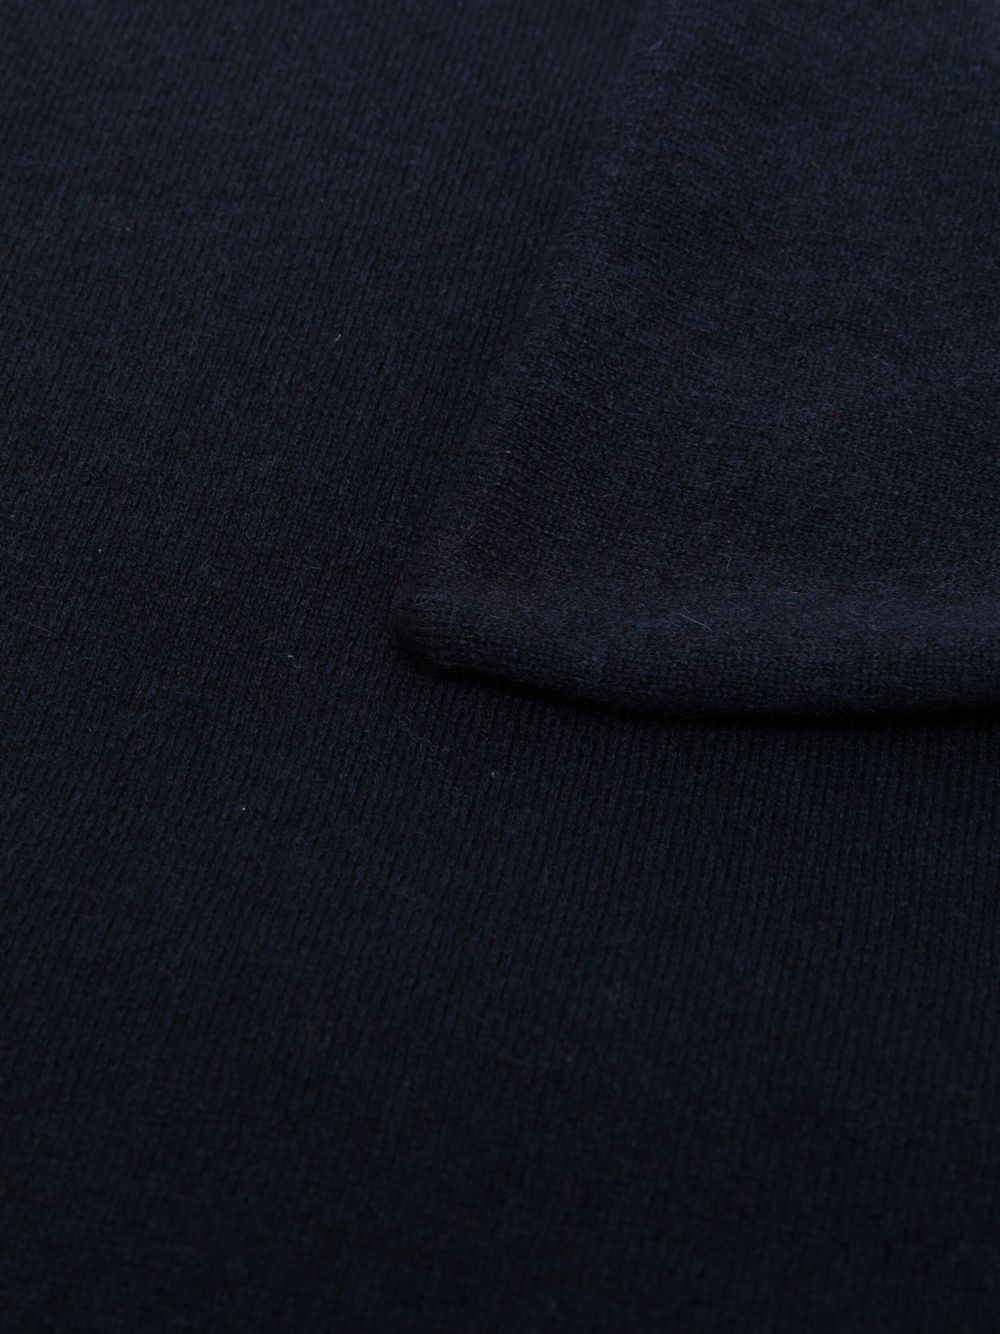 Cashmere Scarf for Women from JIL SANDER FW23 Collection in Navy